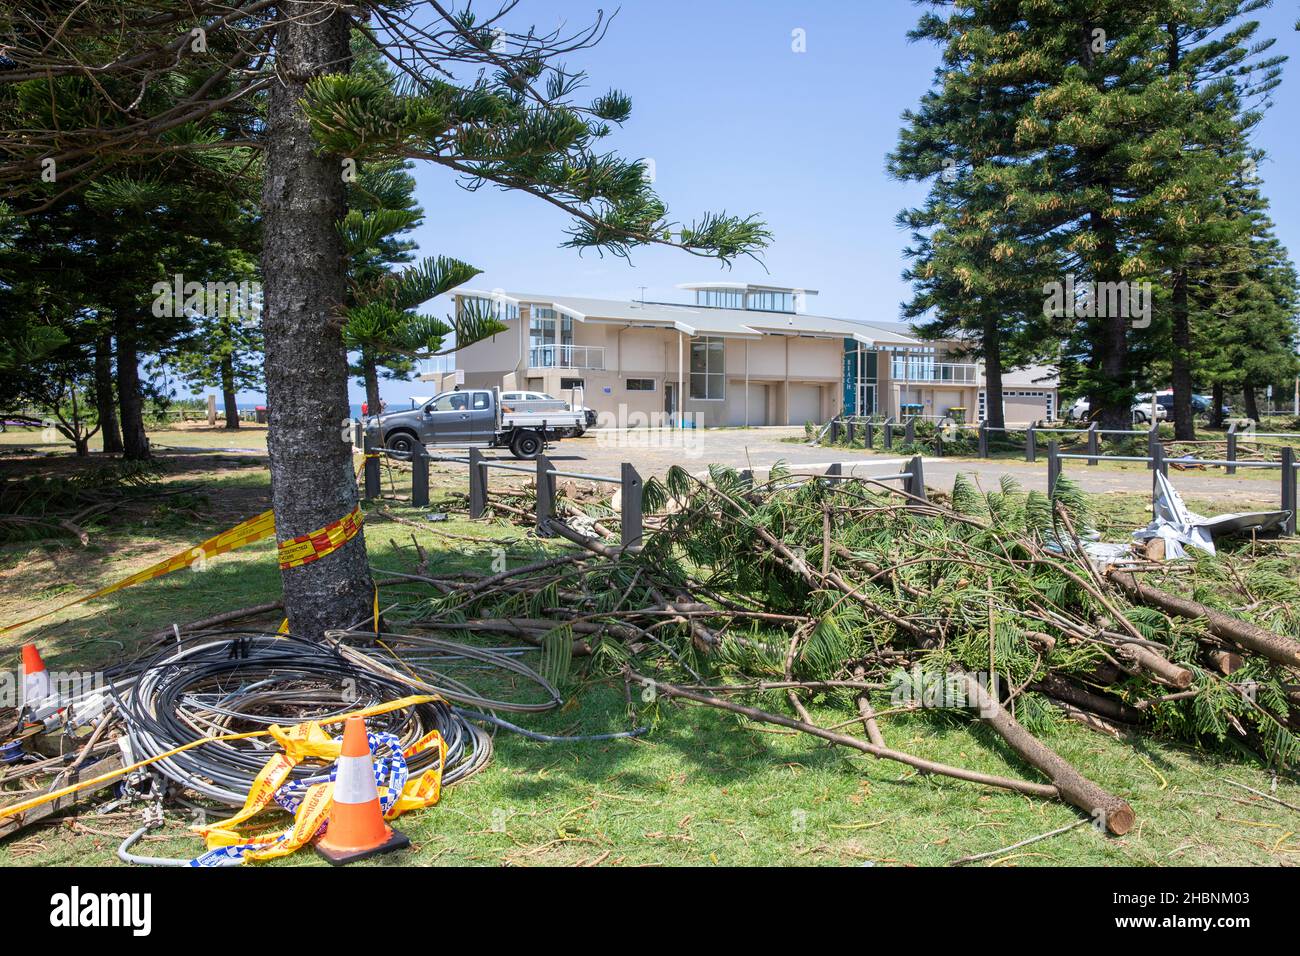 Freak storm led to lady losing her life near Narrabeen surf club as trees fell, day after the clean up begins at the site,Sydney,Australia Stock Photo